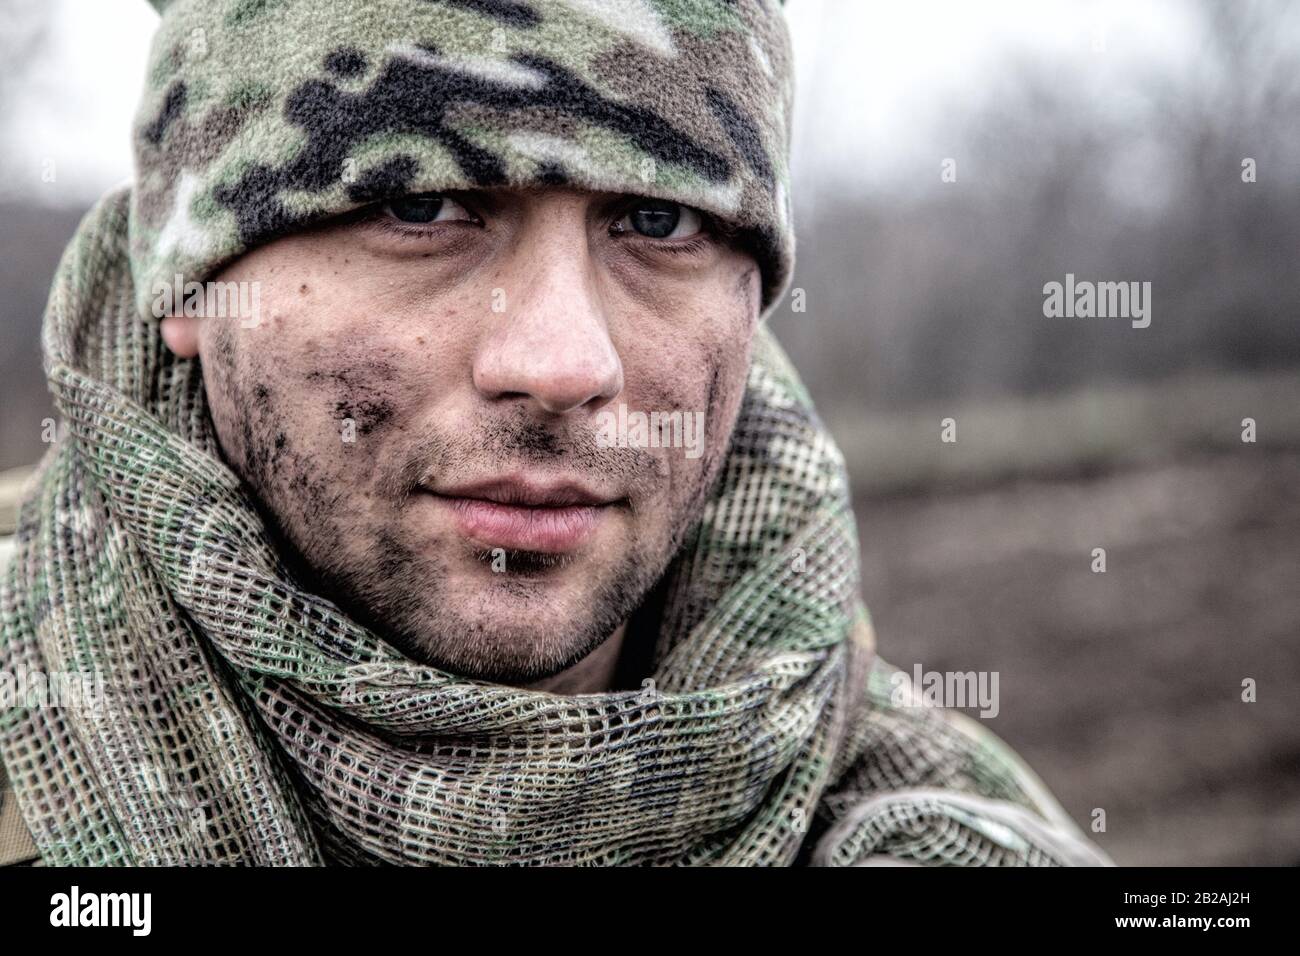 Portrait of soldier, modern combatant with dirty face, firearm replica, wearing camouflage uniform, beanie and masking cape on neck, standing on Stock Photo